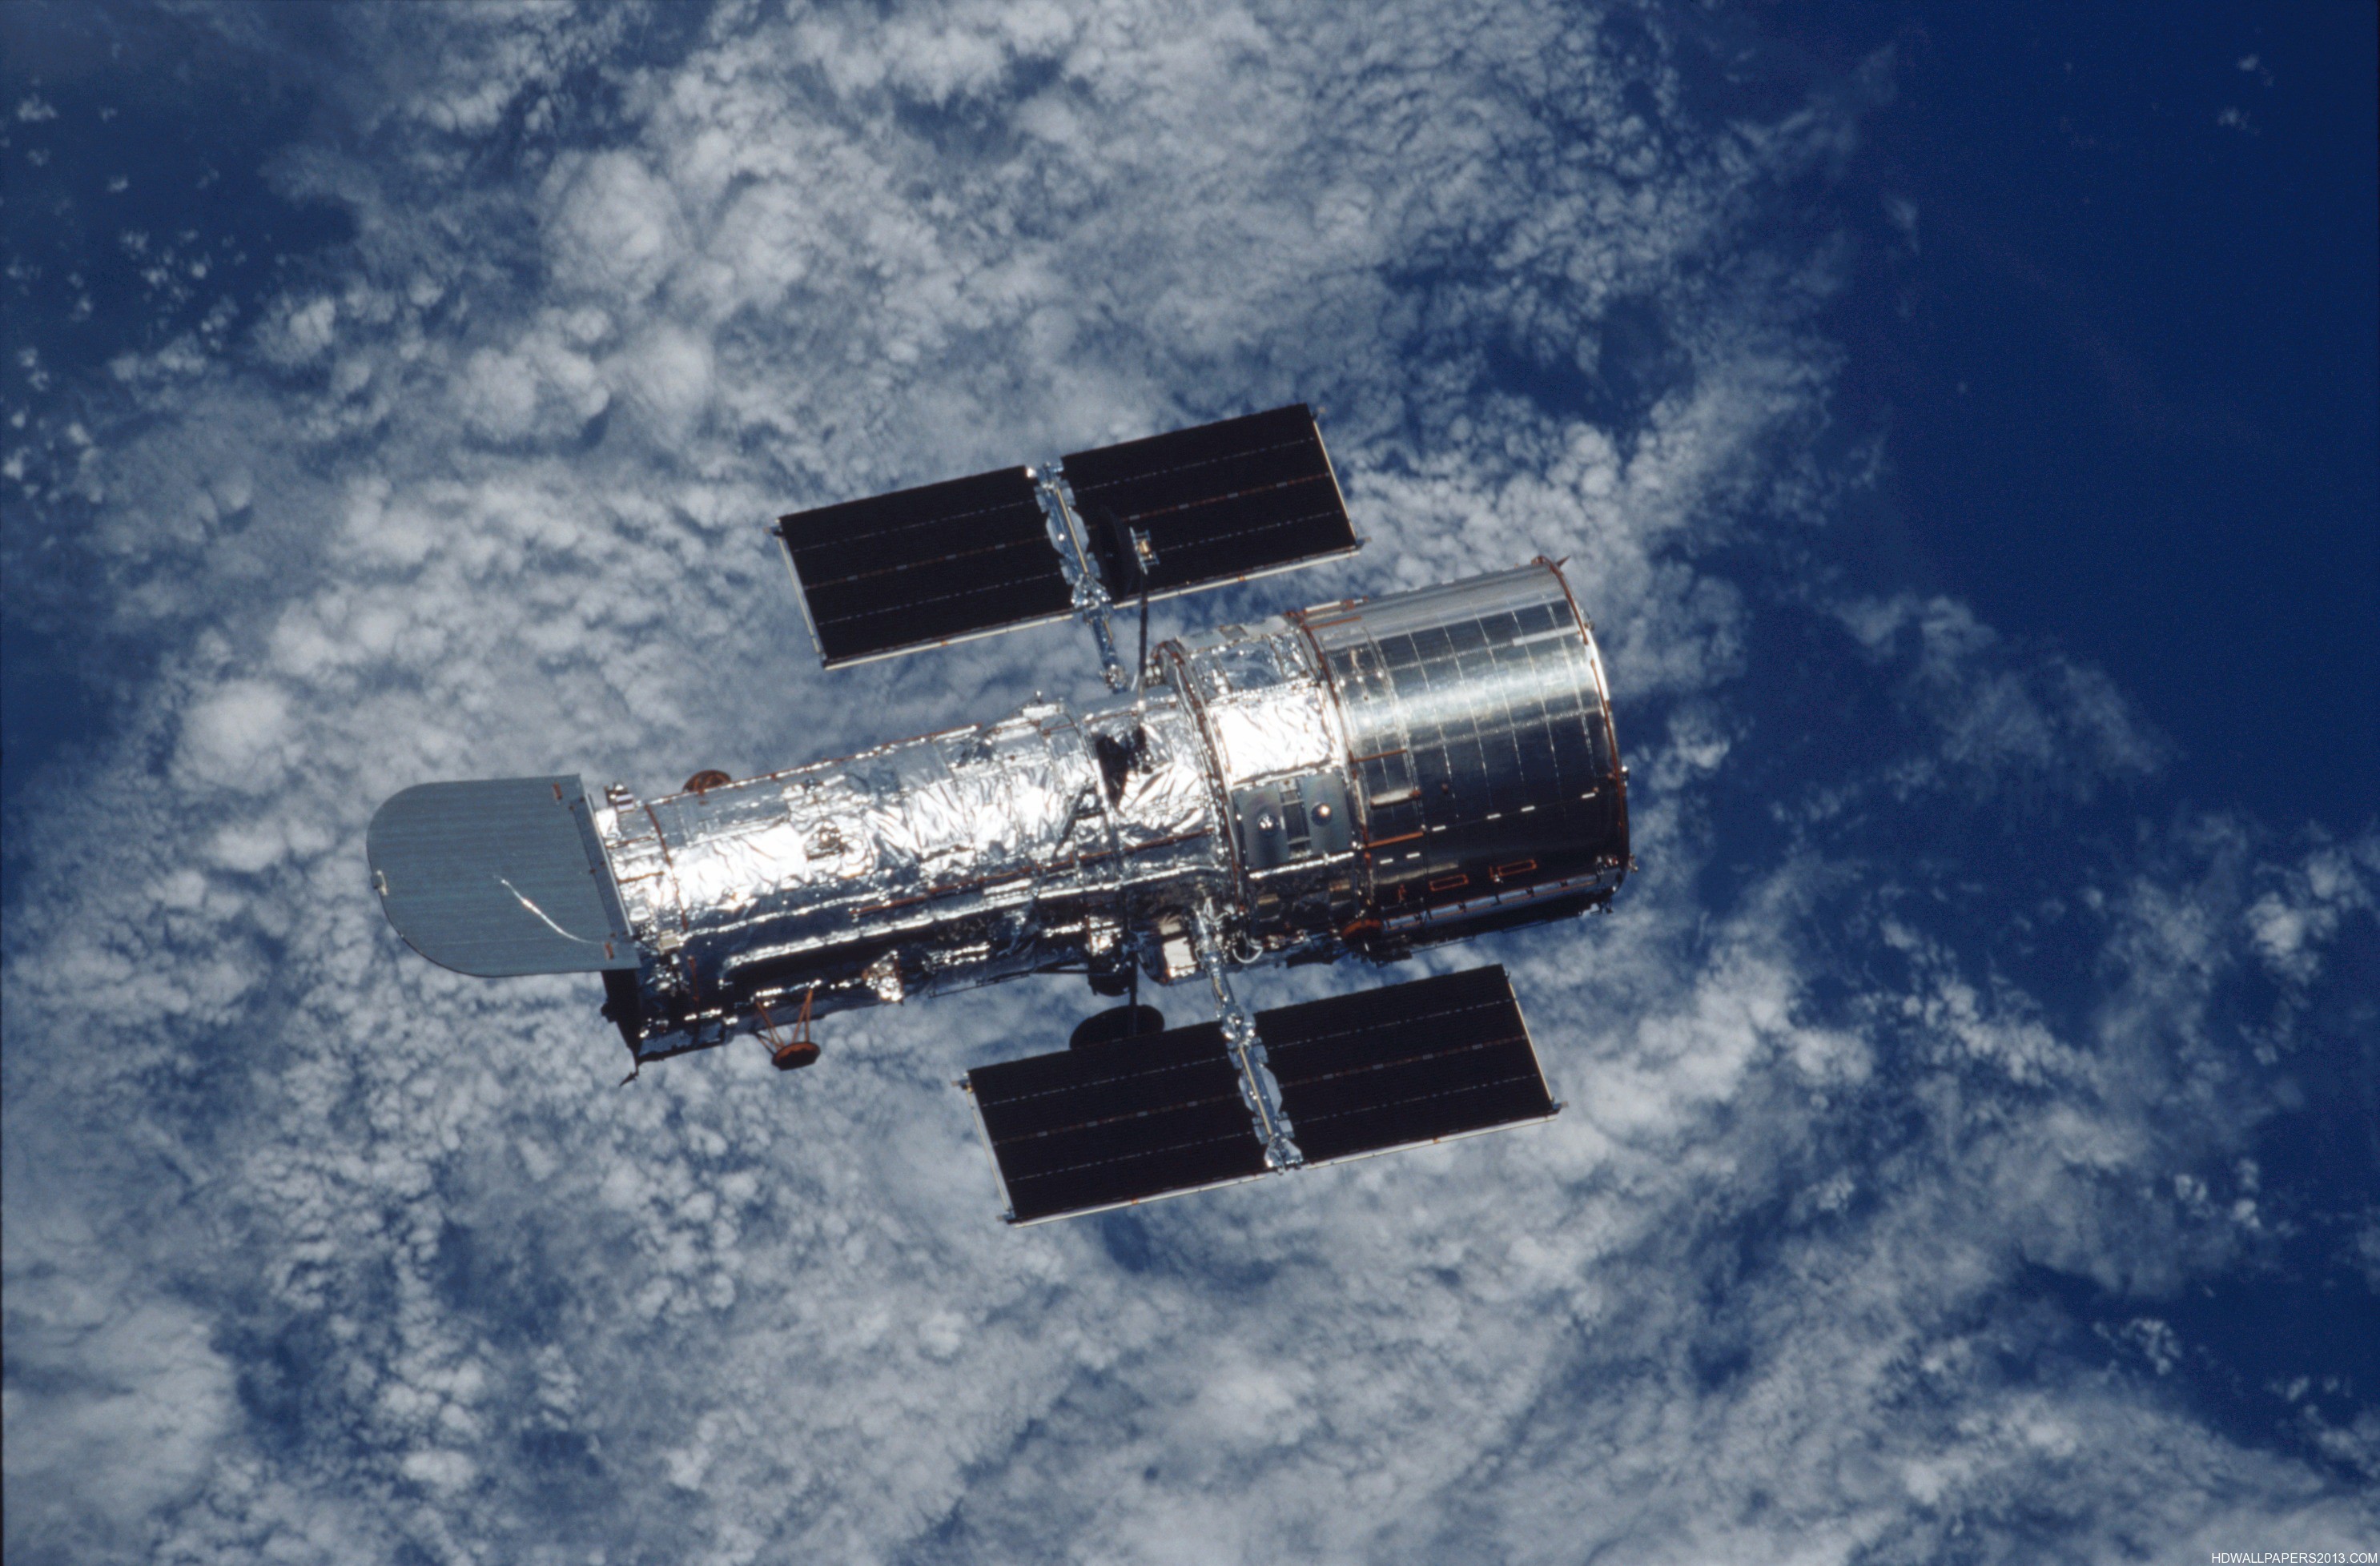 Can the Hubble Space Telescope be seen from the 